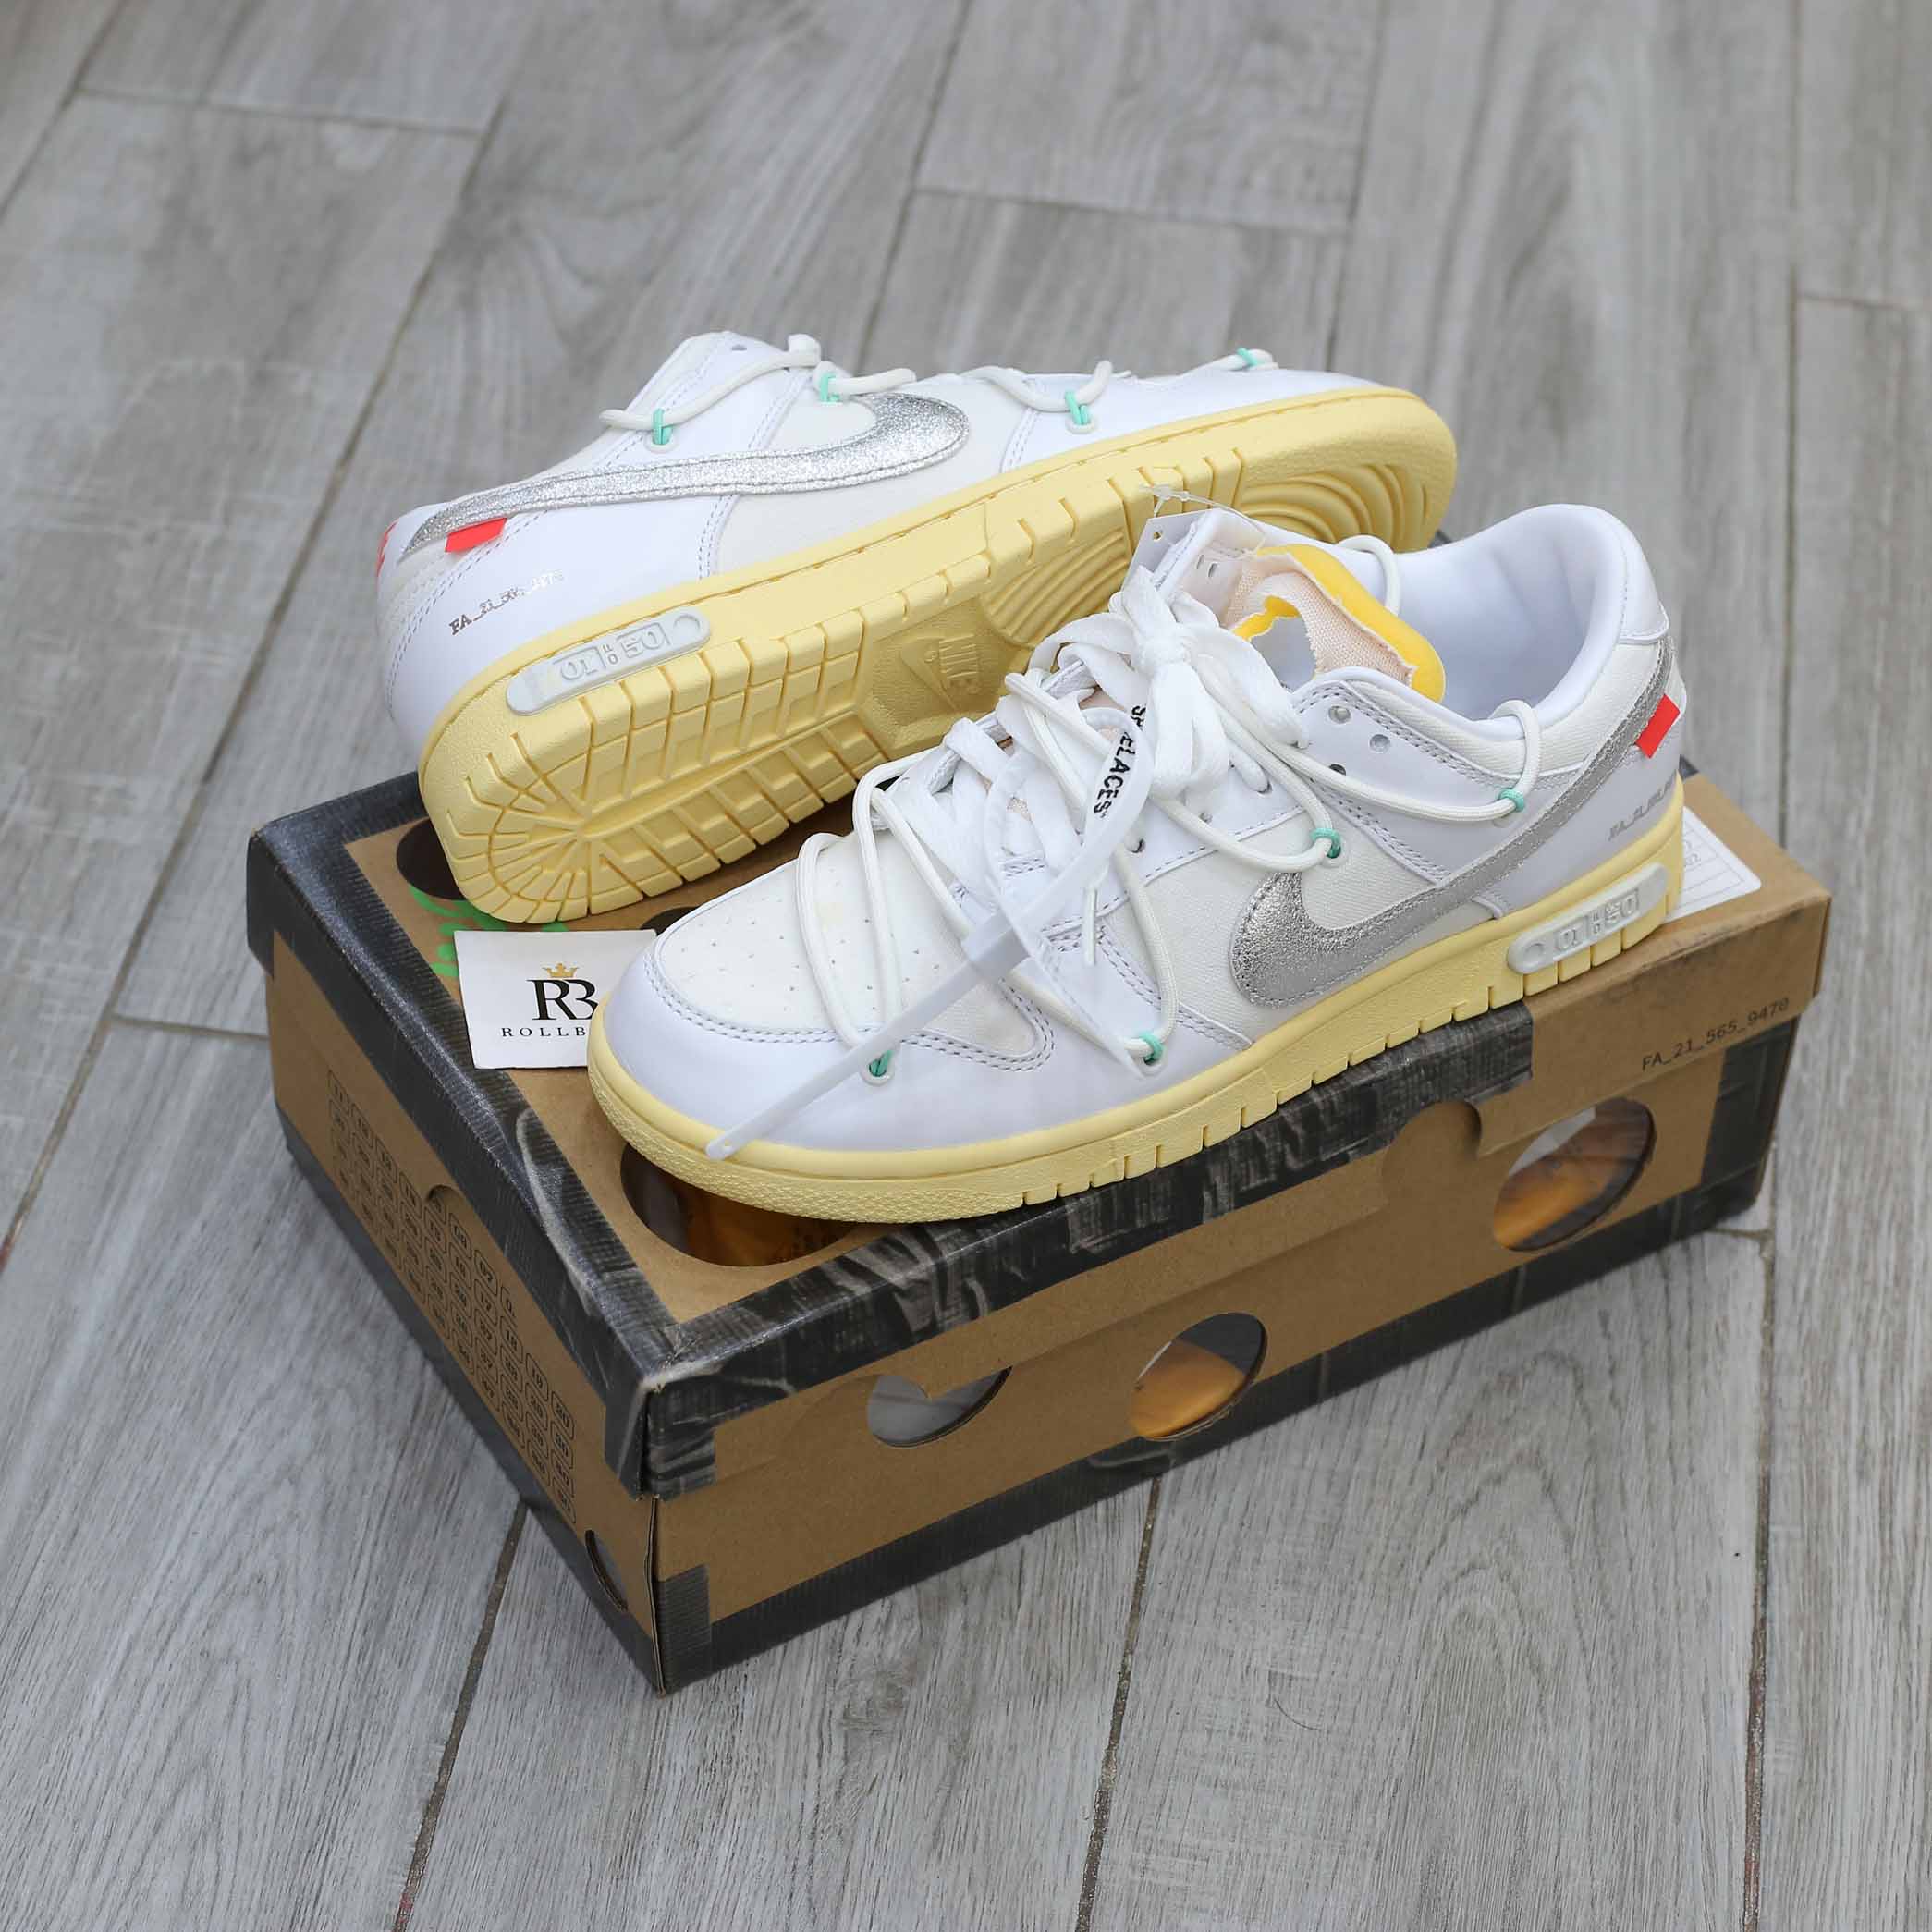 Nike Off-White x Dunk Low ‘Lot 01 Of 50’
